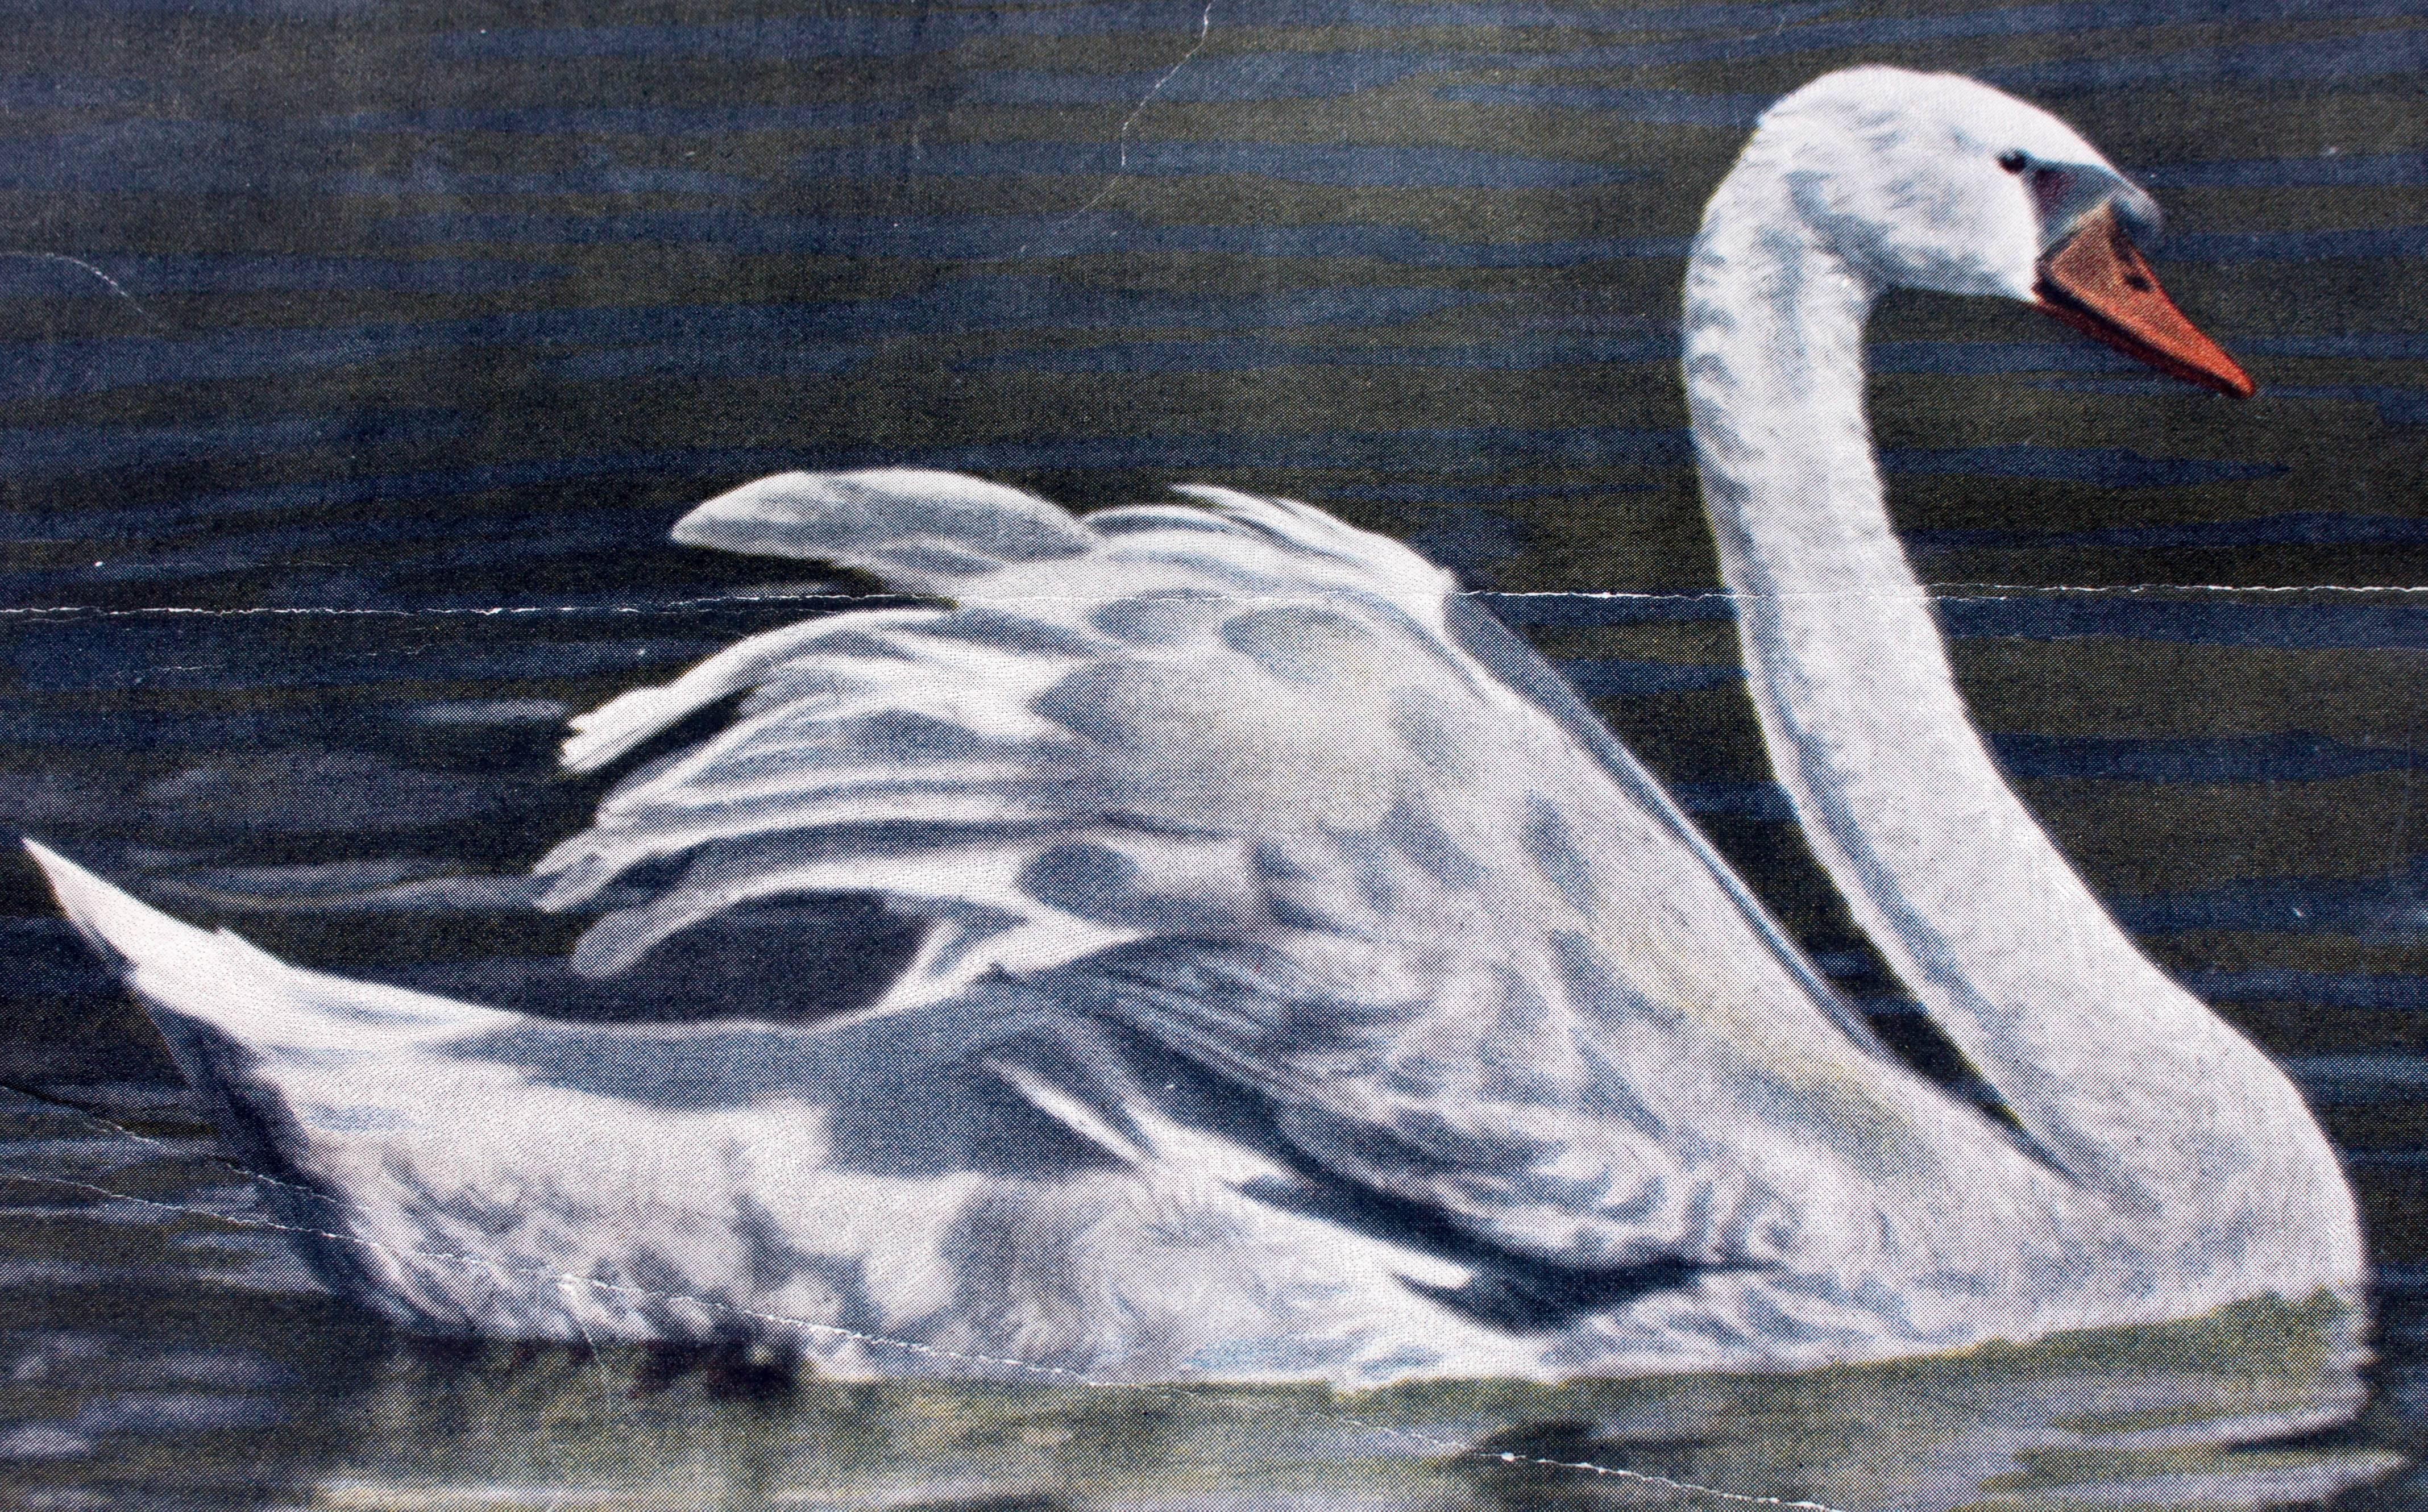 This educational wall chart from the Schönbrunn series depicts a swan and is a photolithography produced by the K.k. Hof- und Staatsdruckerei in Vienna. This piece originates from 1915 and is printed on photopaper that has been stuck on to paper.